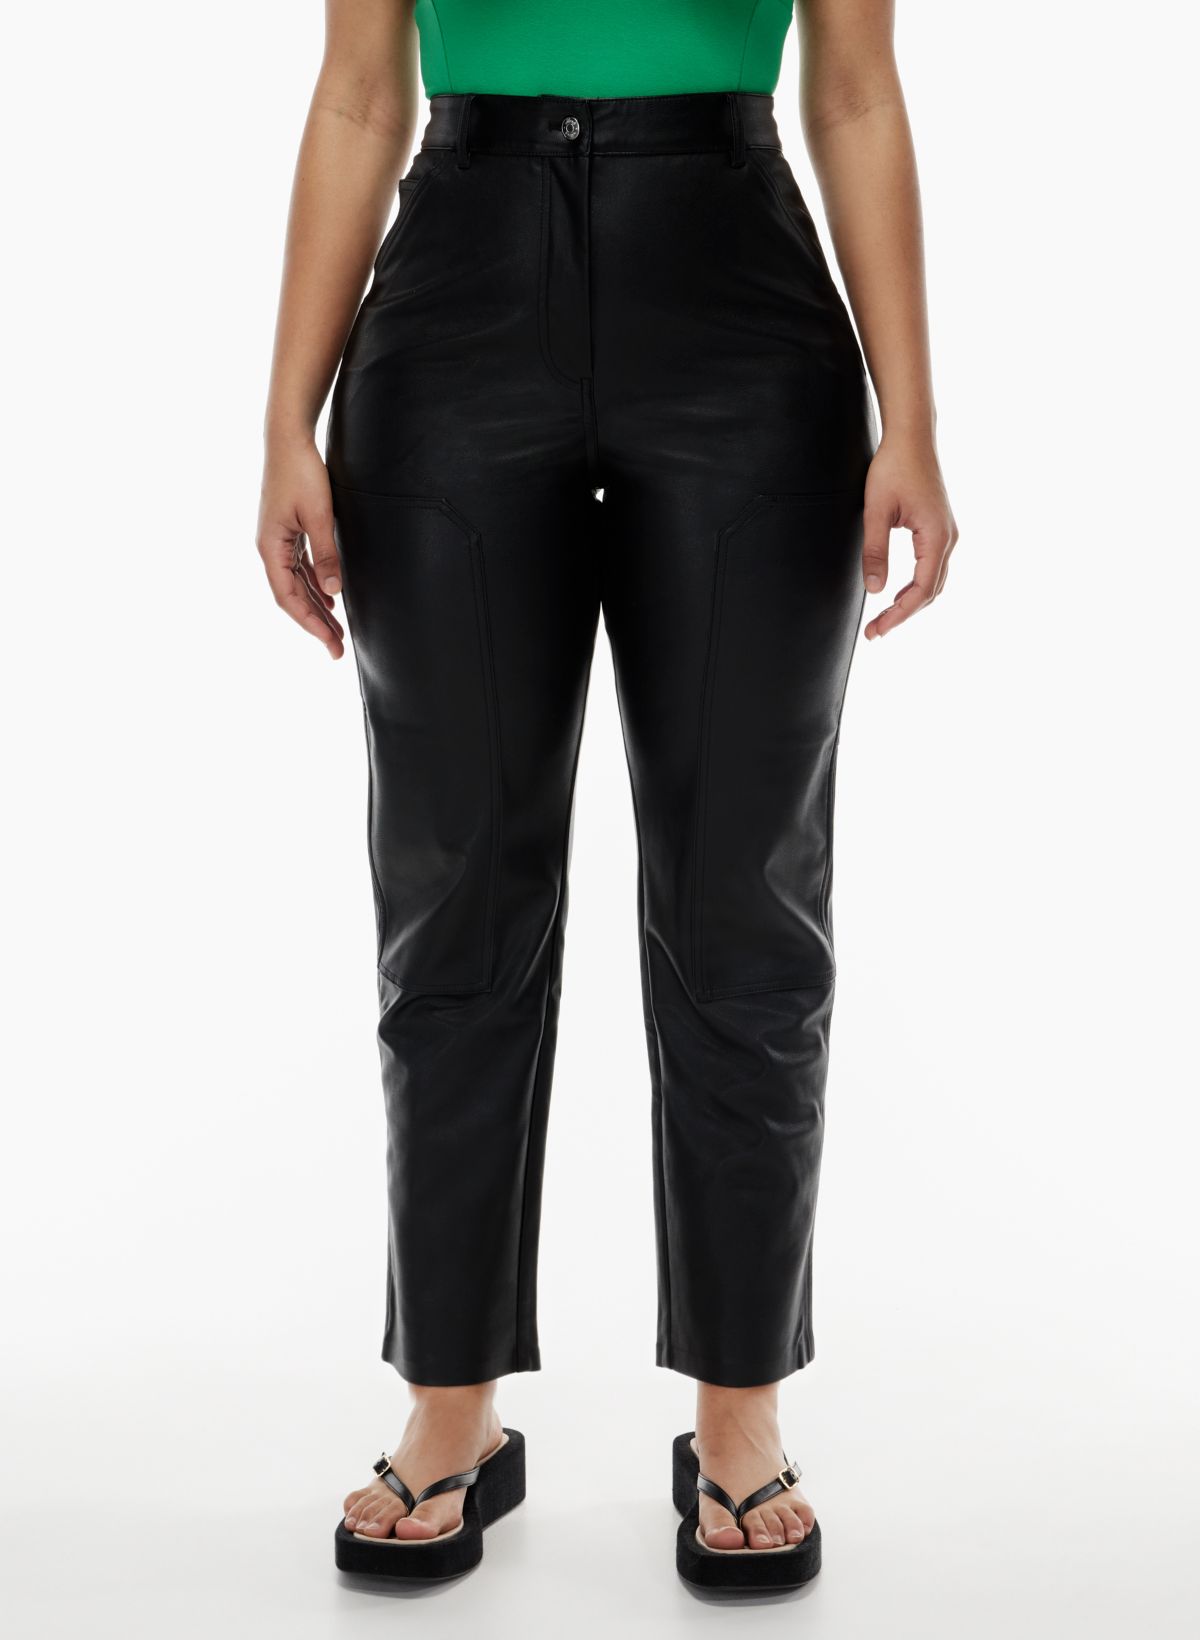 should i keep these brennan pants in the dark olive colour or return for a  khaki/ gold camel colour? : r/Aritzia